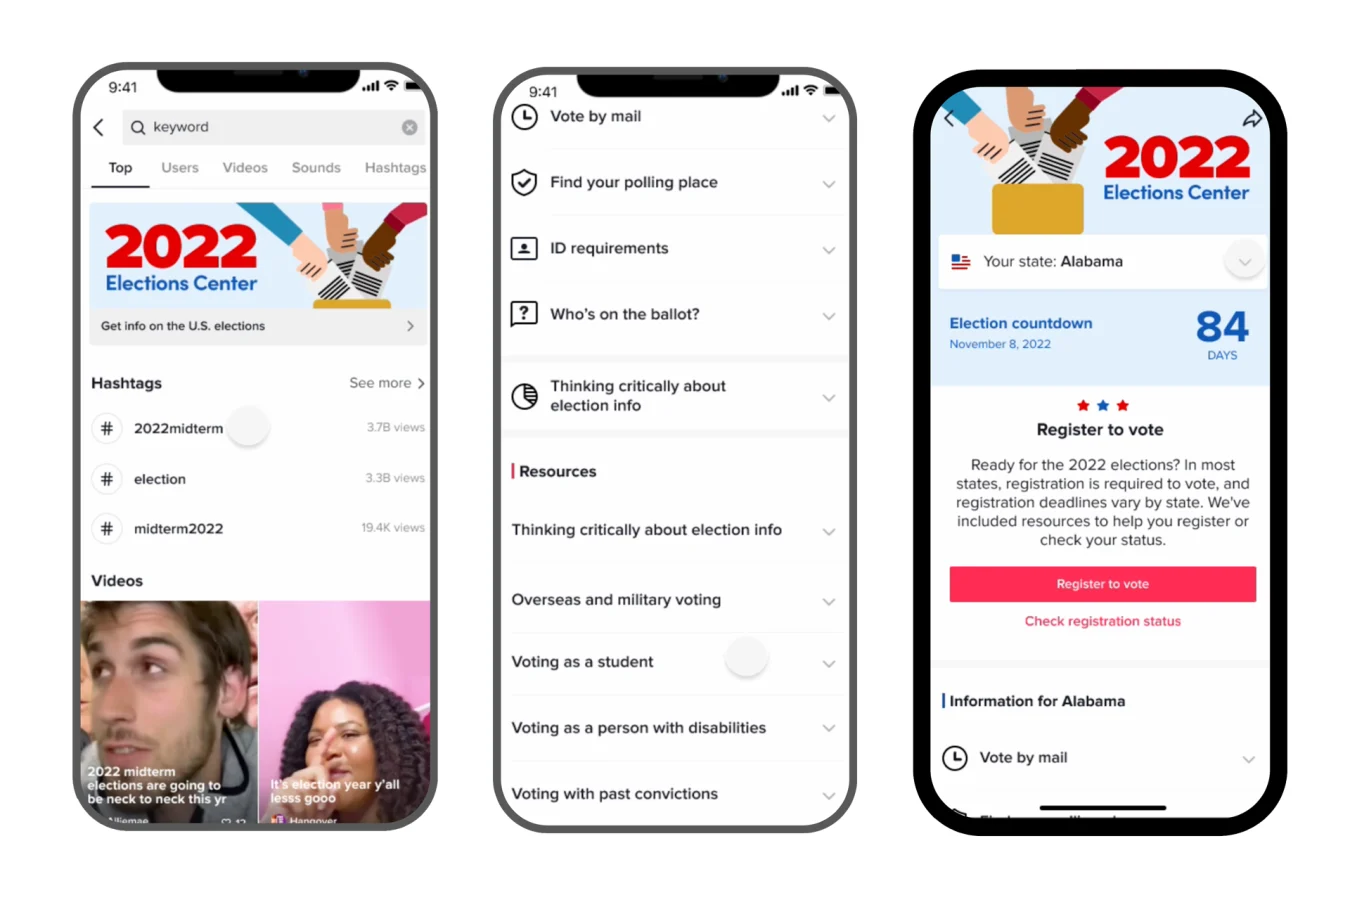 TikTok's 2022 Elections Center is live in the app ahead of the November midterms.